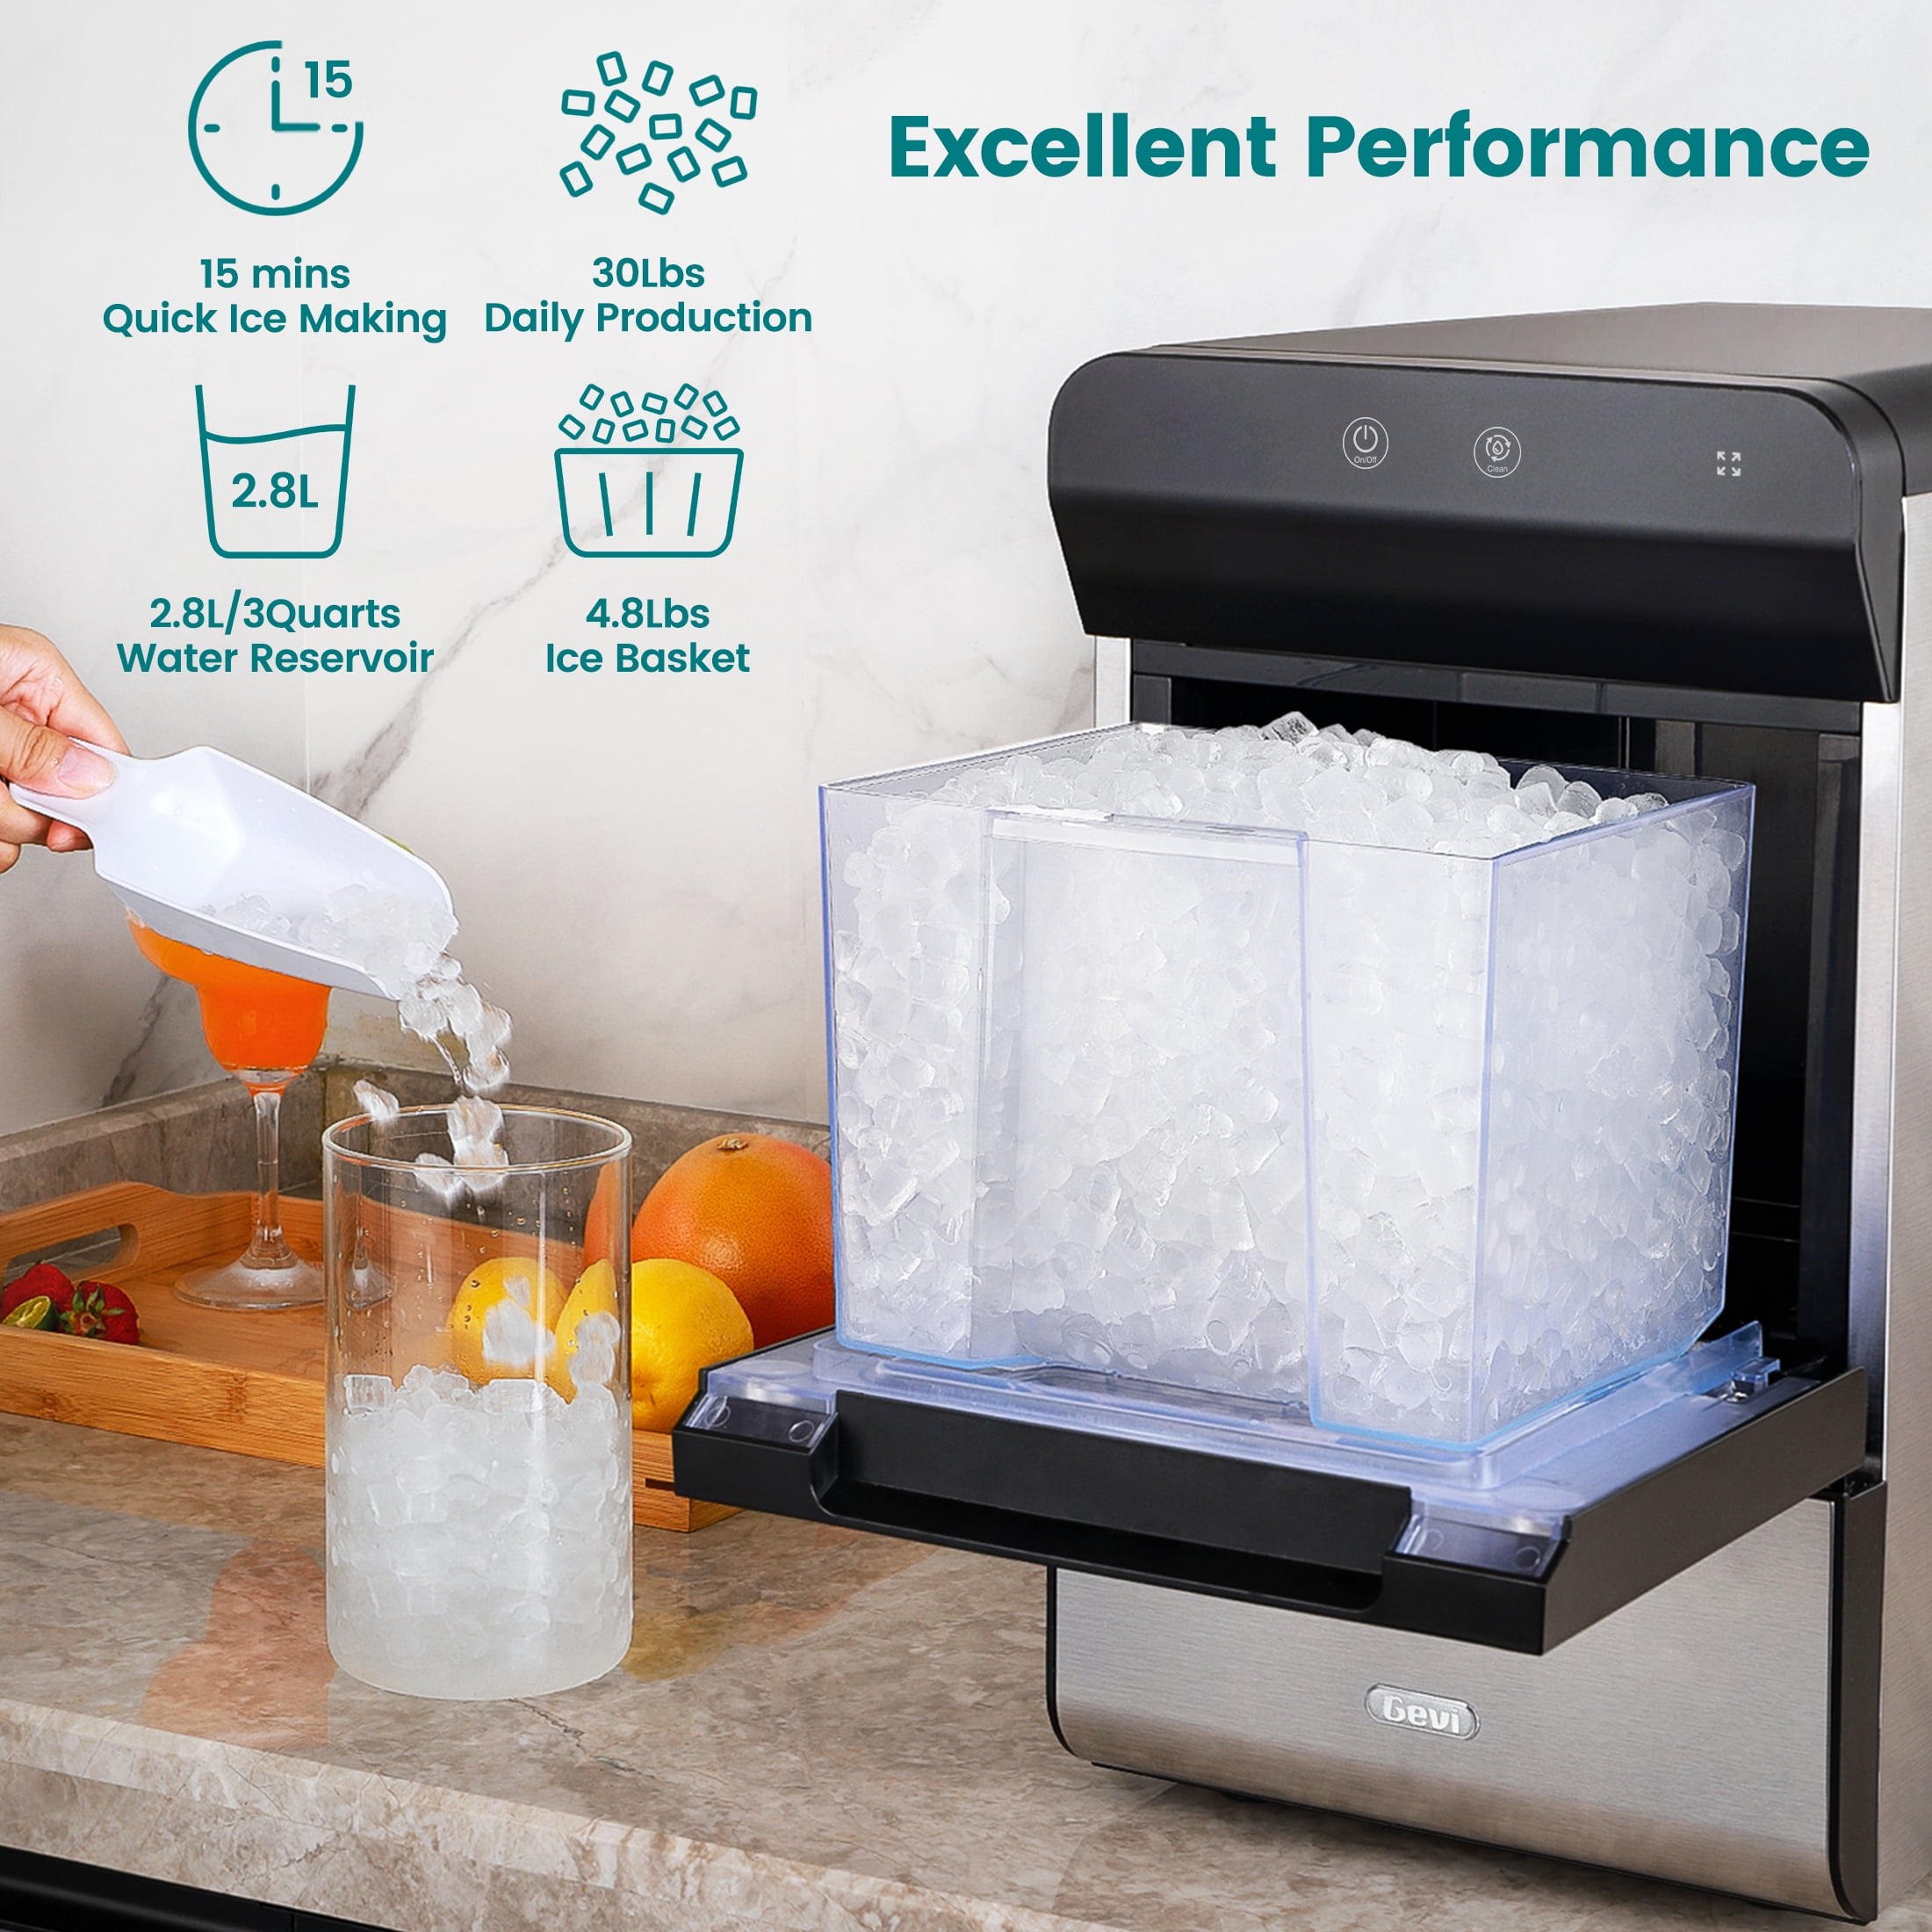  Gevi Household V2.0 Countertop Nugget Ice Maker, Self-Cleaning Pellet  Ice Machine, Open and Pour Water Refill, Stainless Steel Housing, Fit  Under Wall Cabinet